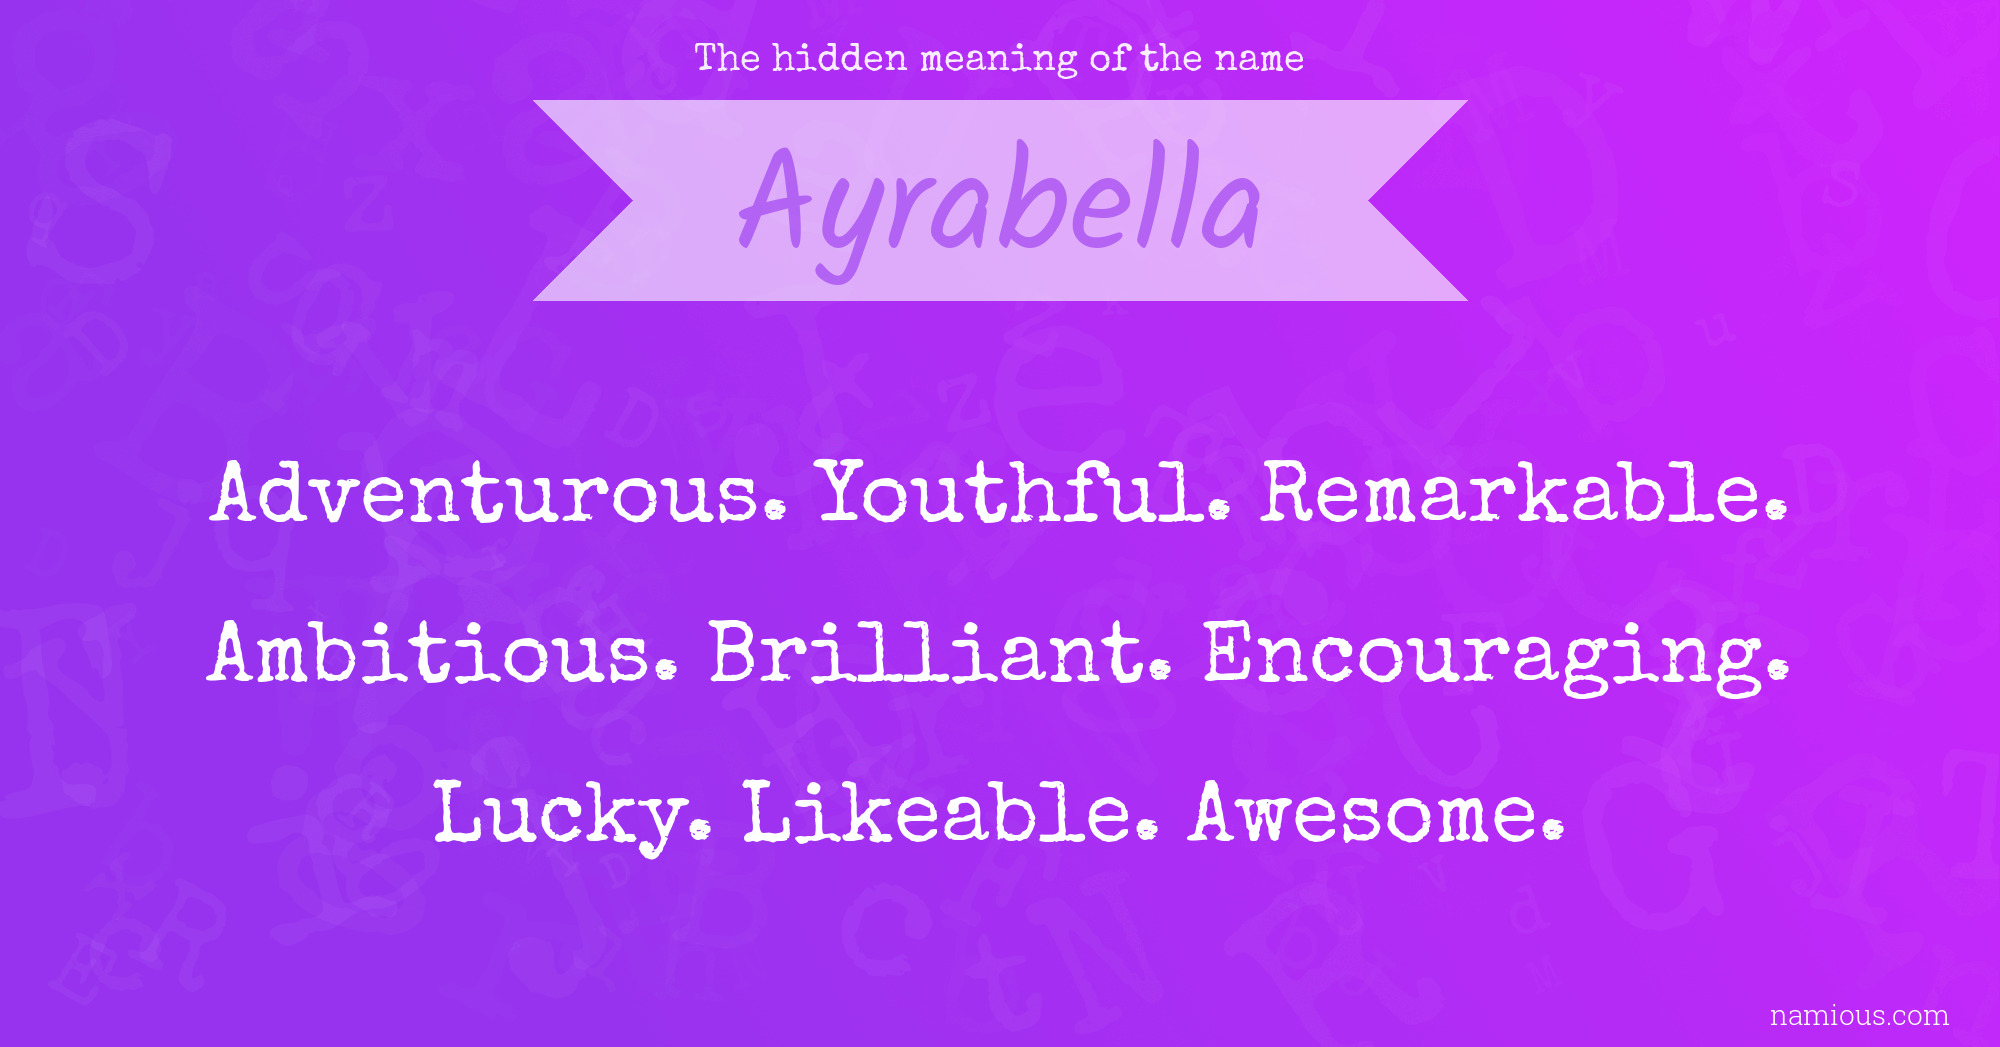 The hidden meaning of the name Ayrabella